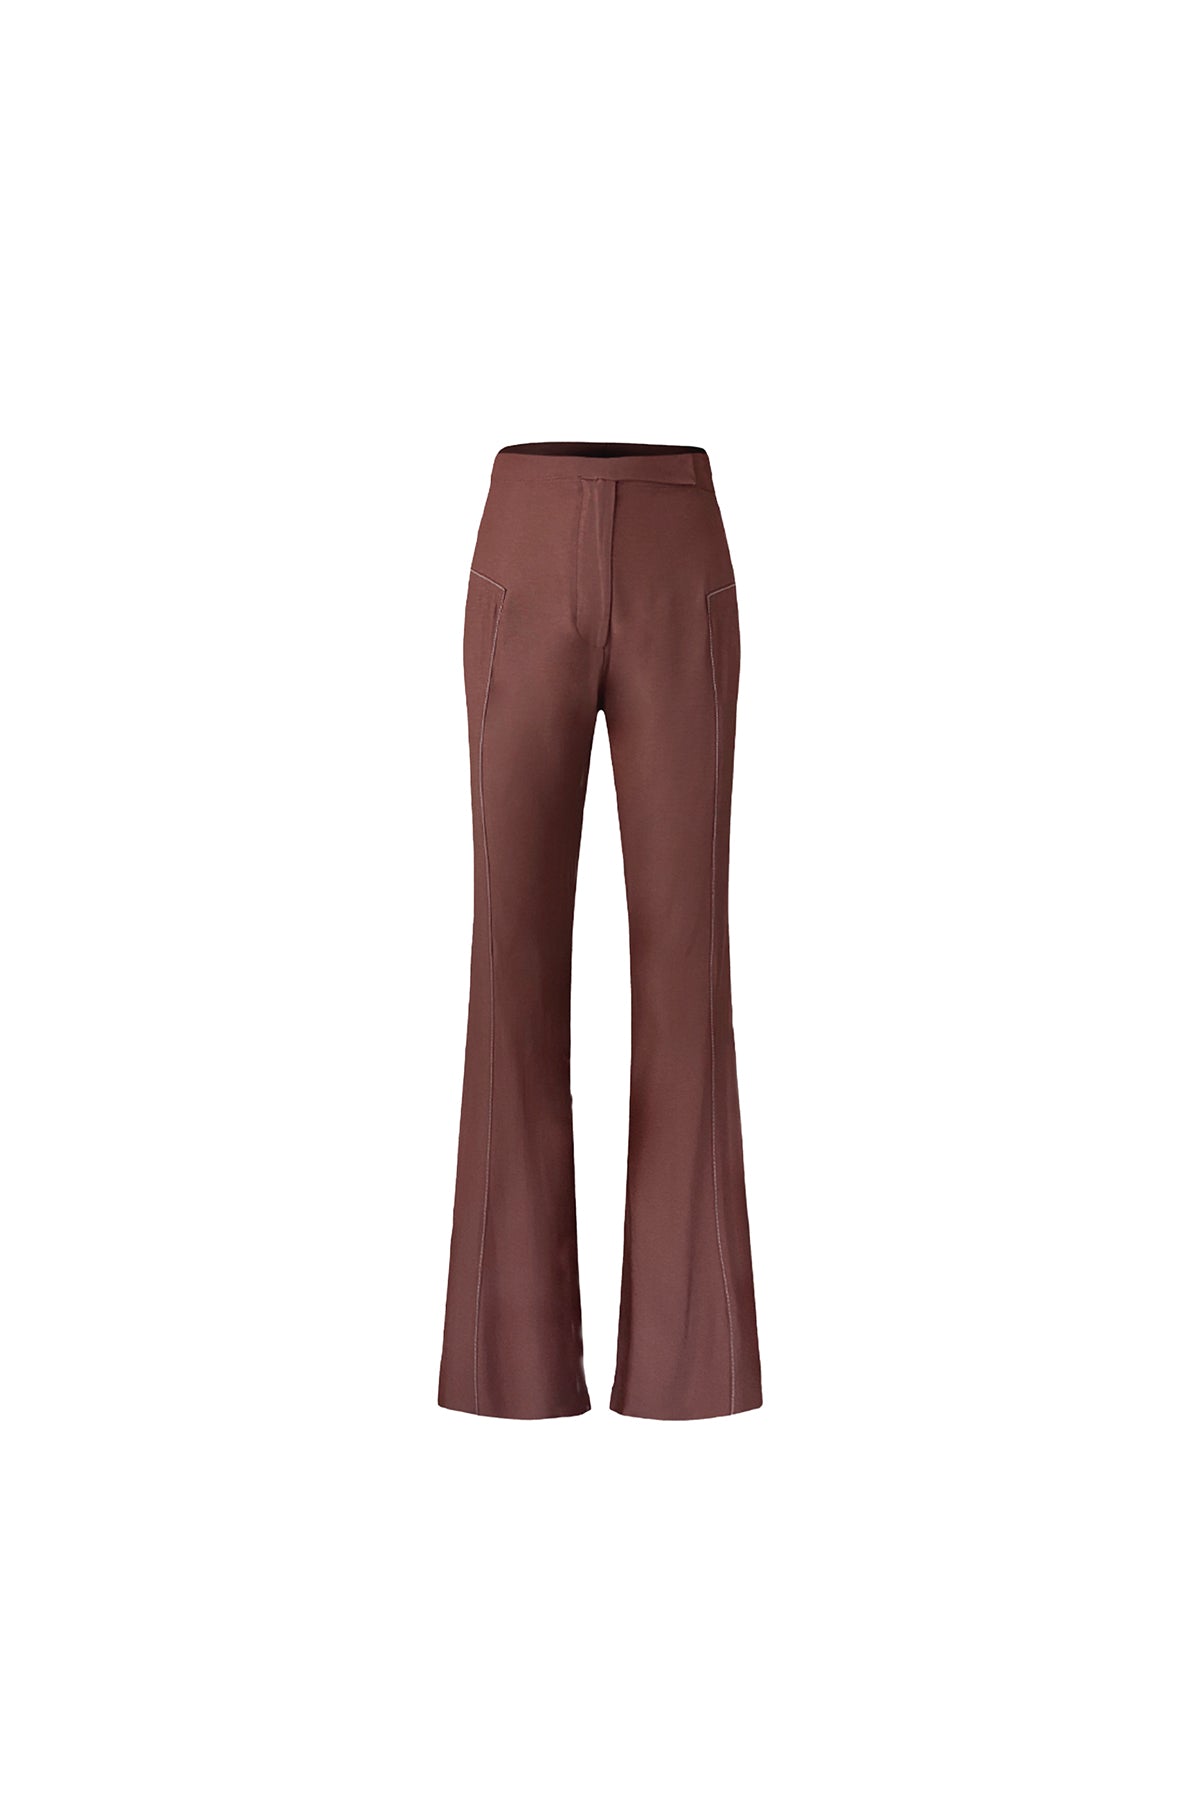 Contrast Stitch Flared Pants